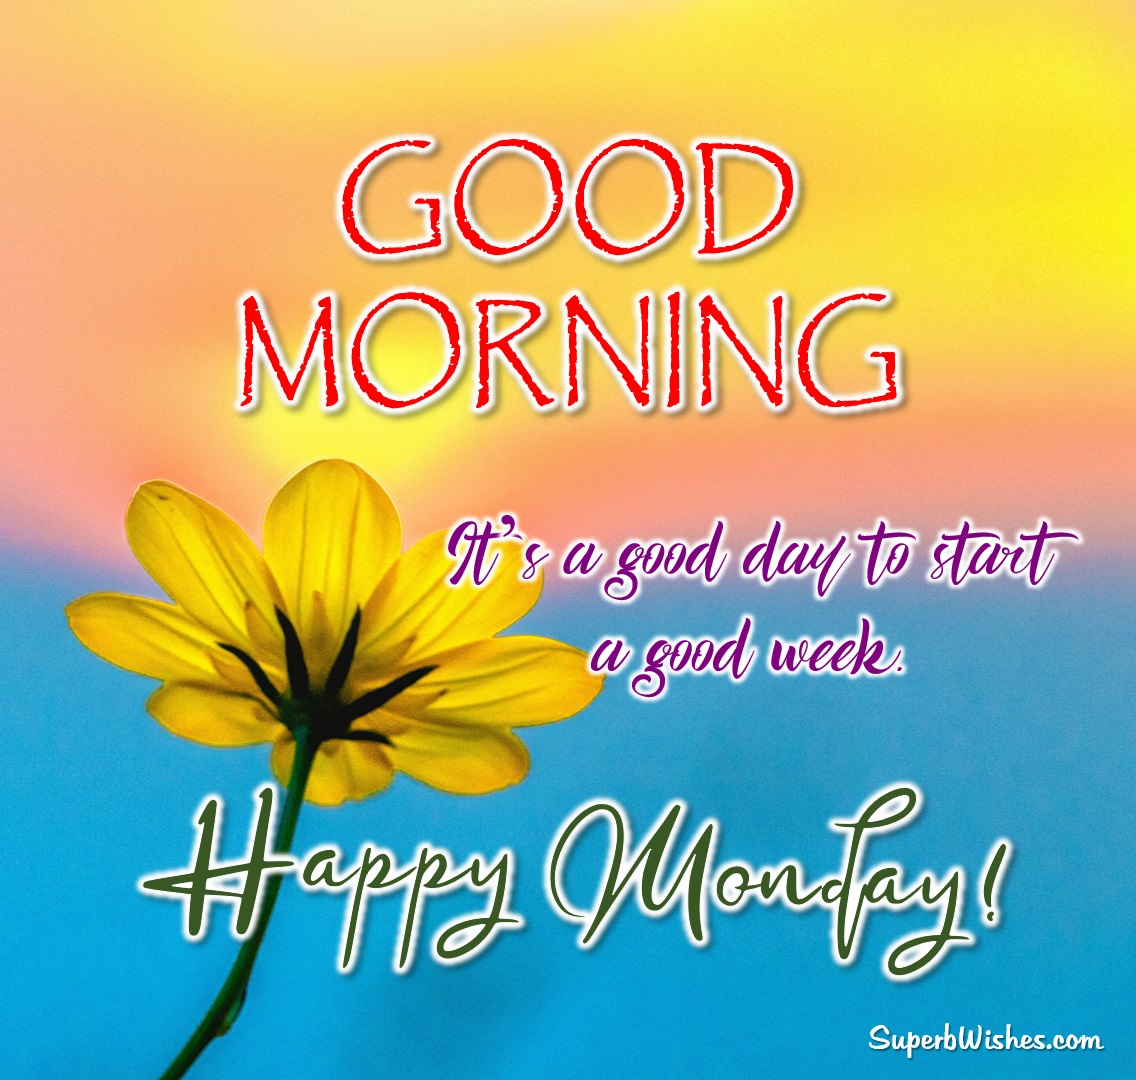 Happy Monday Images - A Good Day To Start A Good Week | SuperbWishes